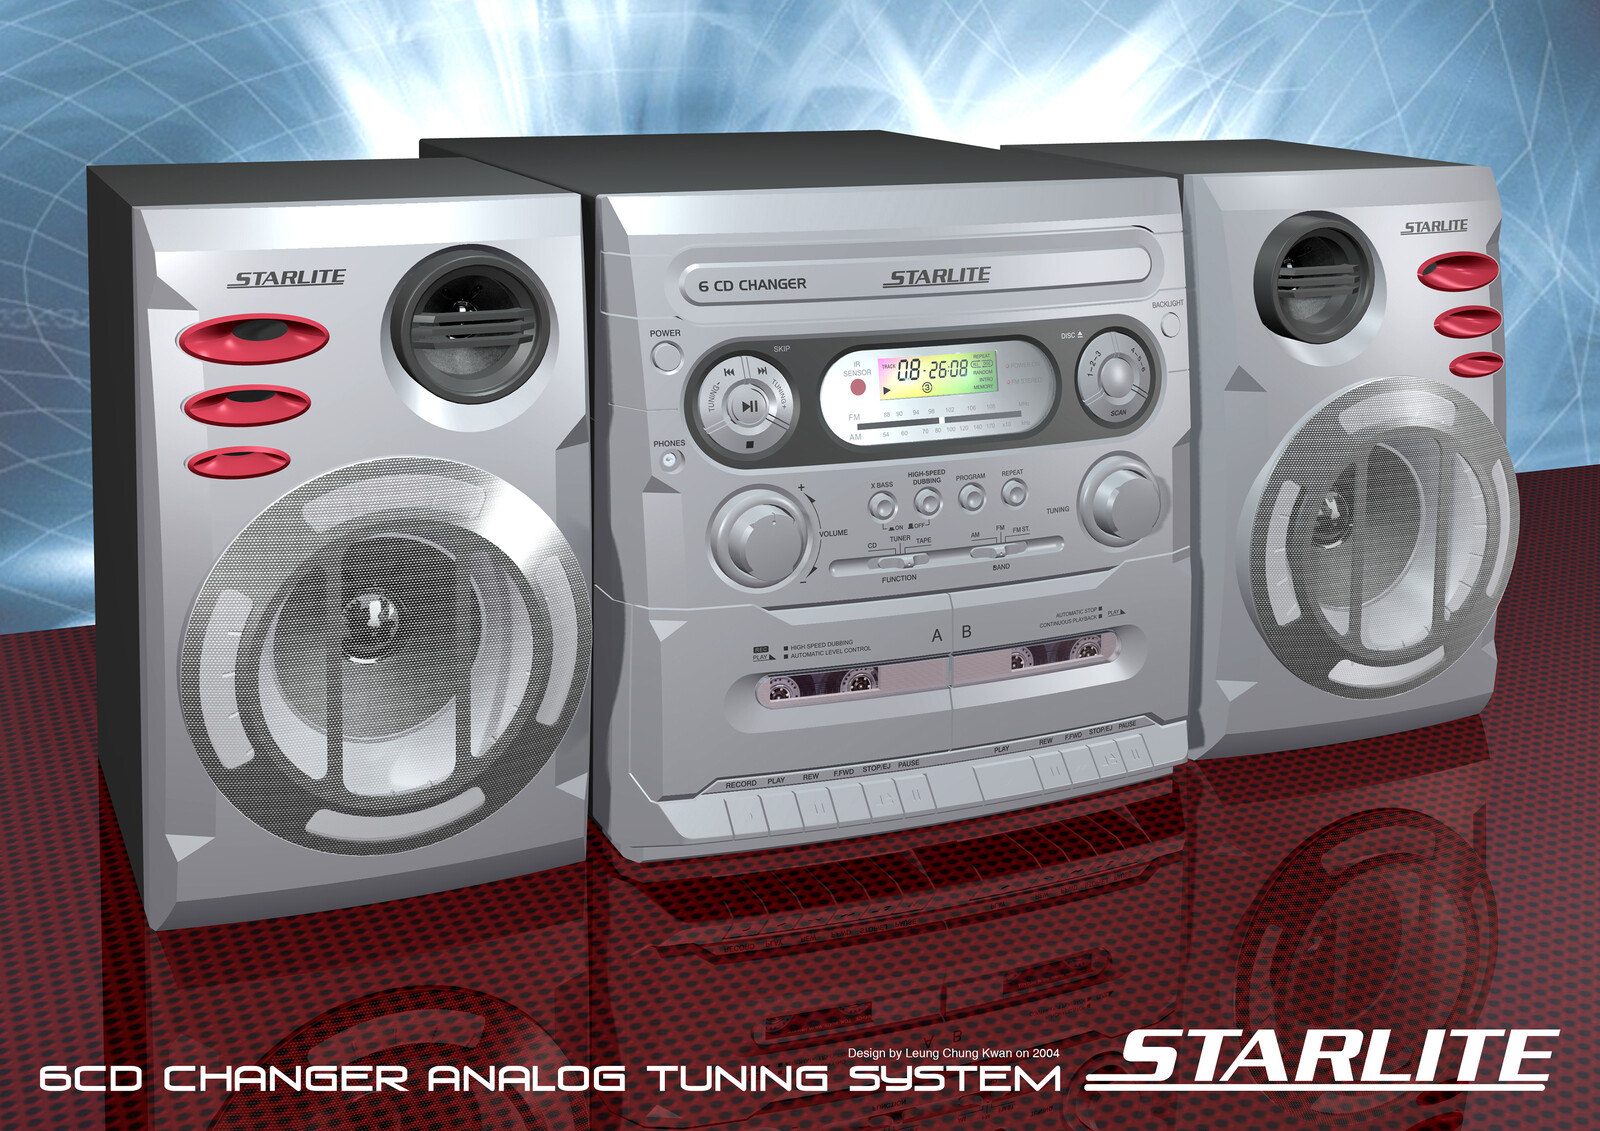 💎 6 CD Changer Analog Tuner with Double Cassette Hi-Fi | Design by Leung Chung Kwan on 2004 💎
Brand Name︰Starlite | Client︰Star Light Electronics Co., LTD.
Other Views︰http://bit.ly/sl03b-6cd-analog-double